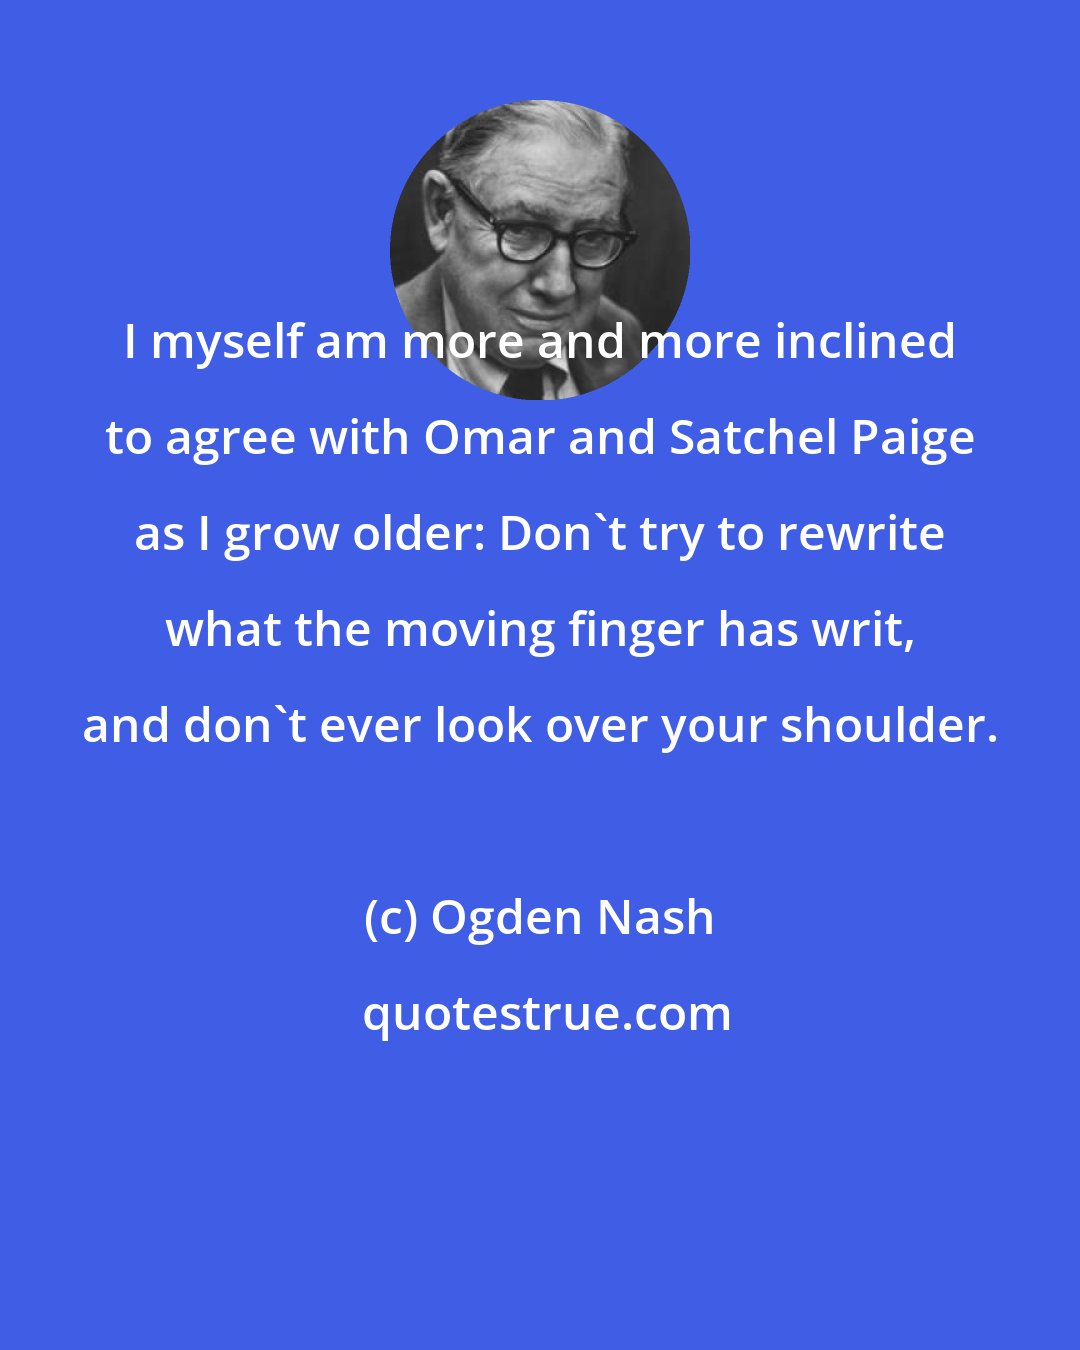 Ogden Nash: I myself am more and more inclined to agree with Omar and Satchel Paige as I grow older: Don't try to rewrite what the moving finger has writ, and don't ever look over your shoulder.